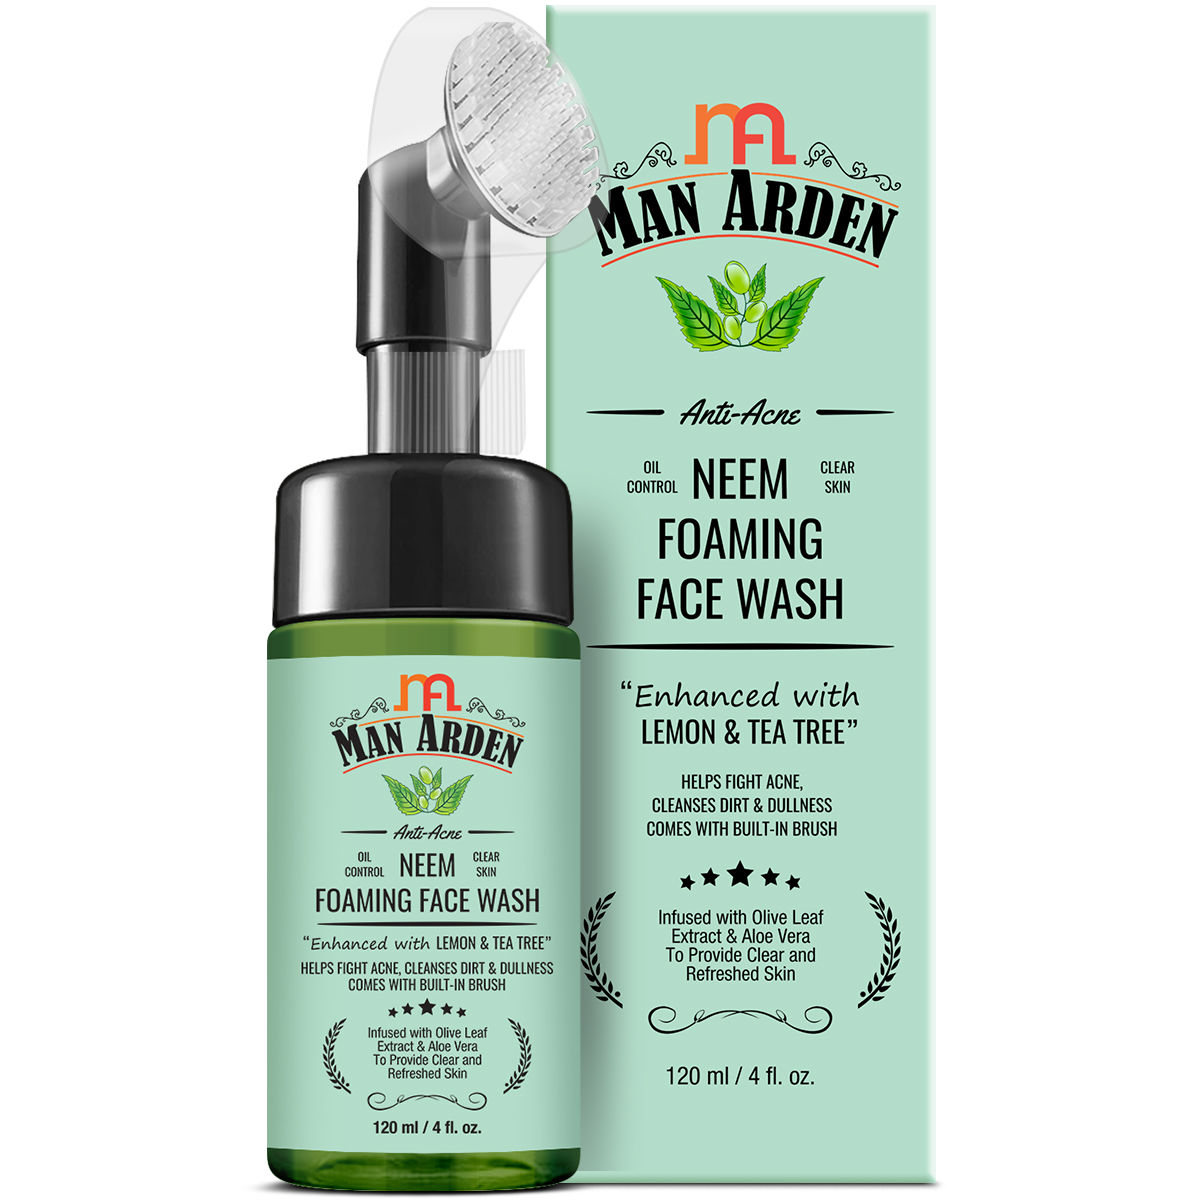 Buy Man Arden Anti-Acne Neem Foaming Face Wash with Built-in Brush - Helps Fight Acne, Cleanses Dirt And Dullness - Infused With Olive Leaf Extract And Aloe Vera (120 ml) - Purplle